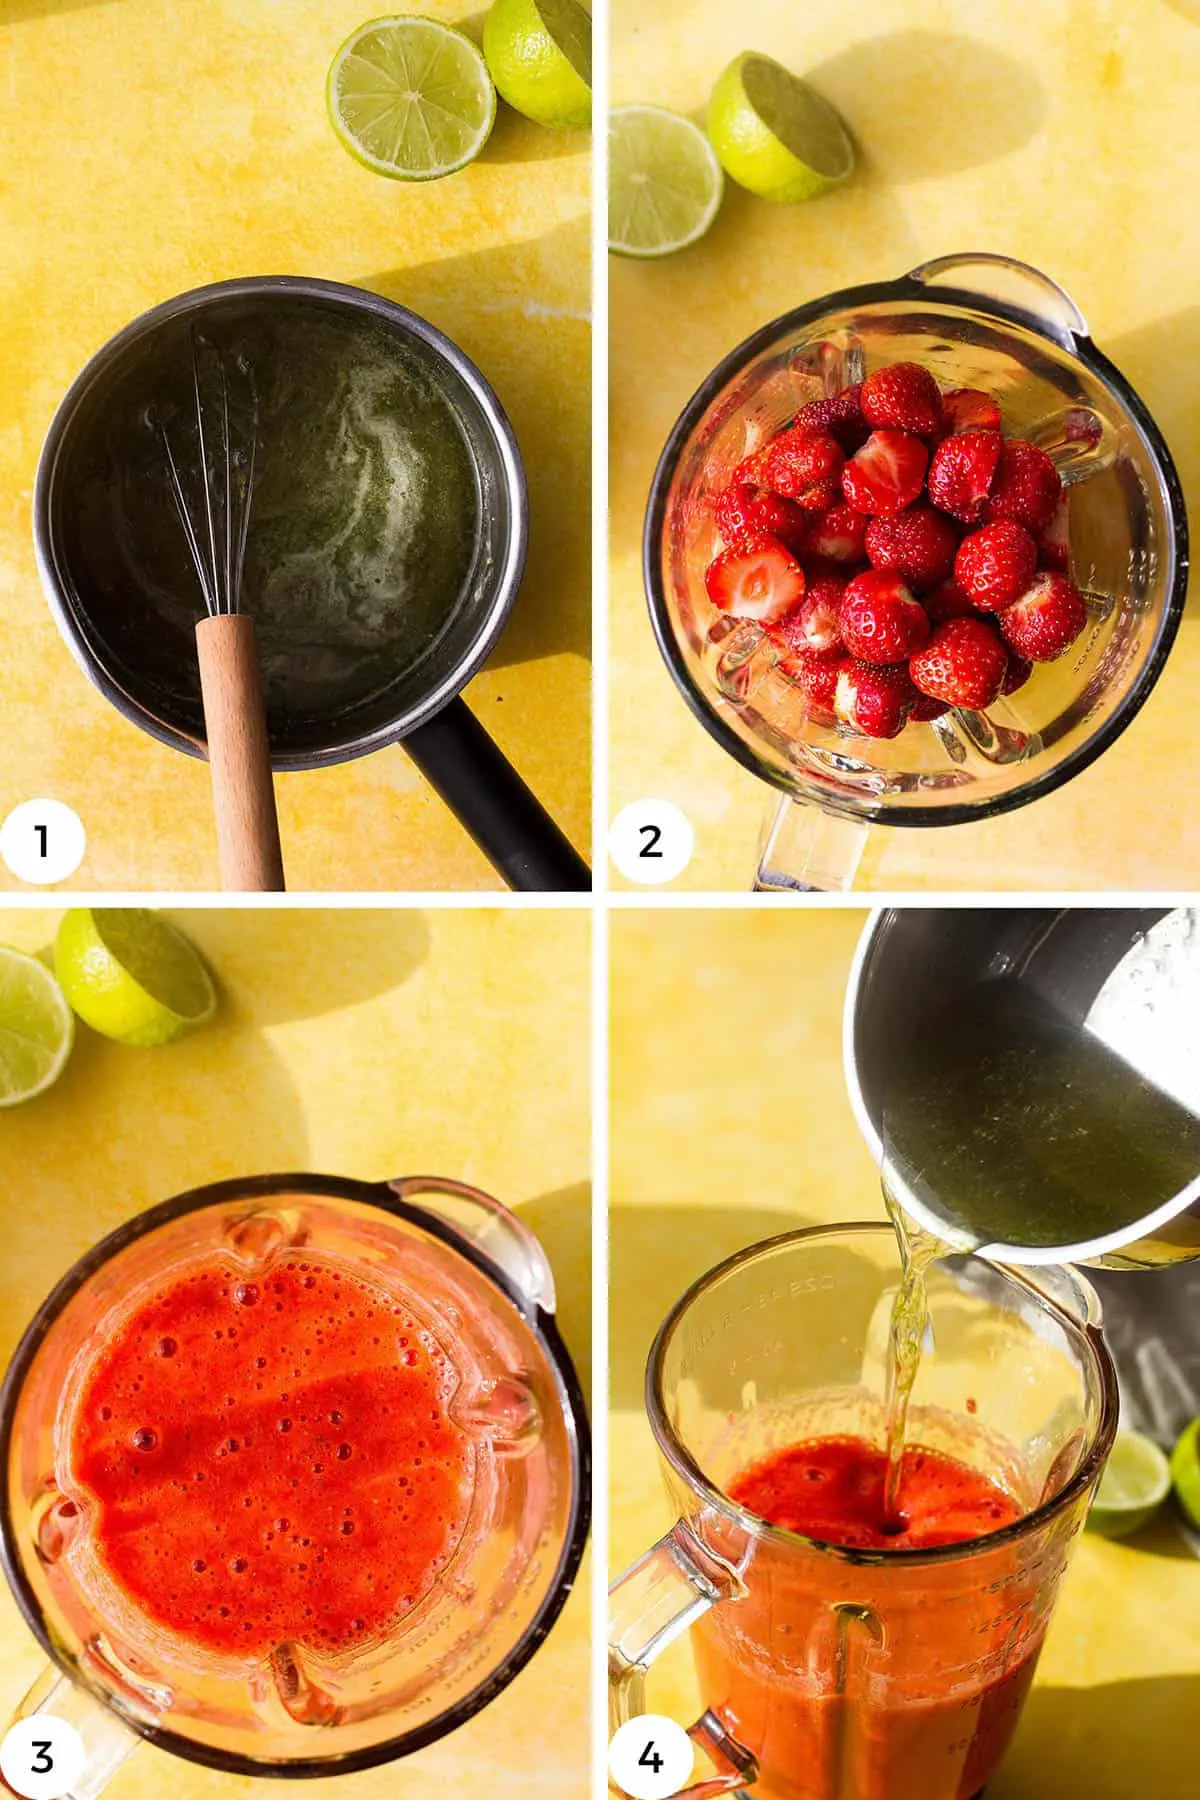 Steps to make the strawberry syrup.